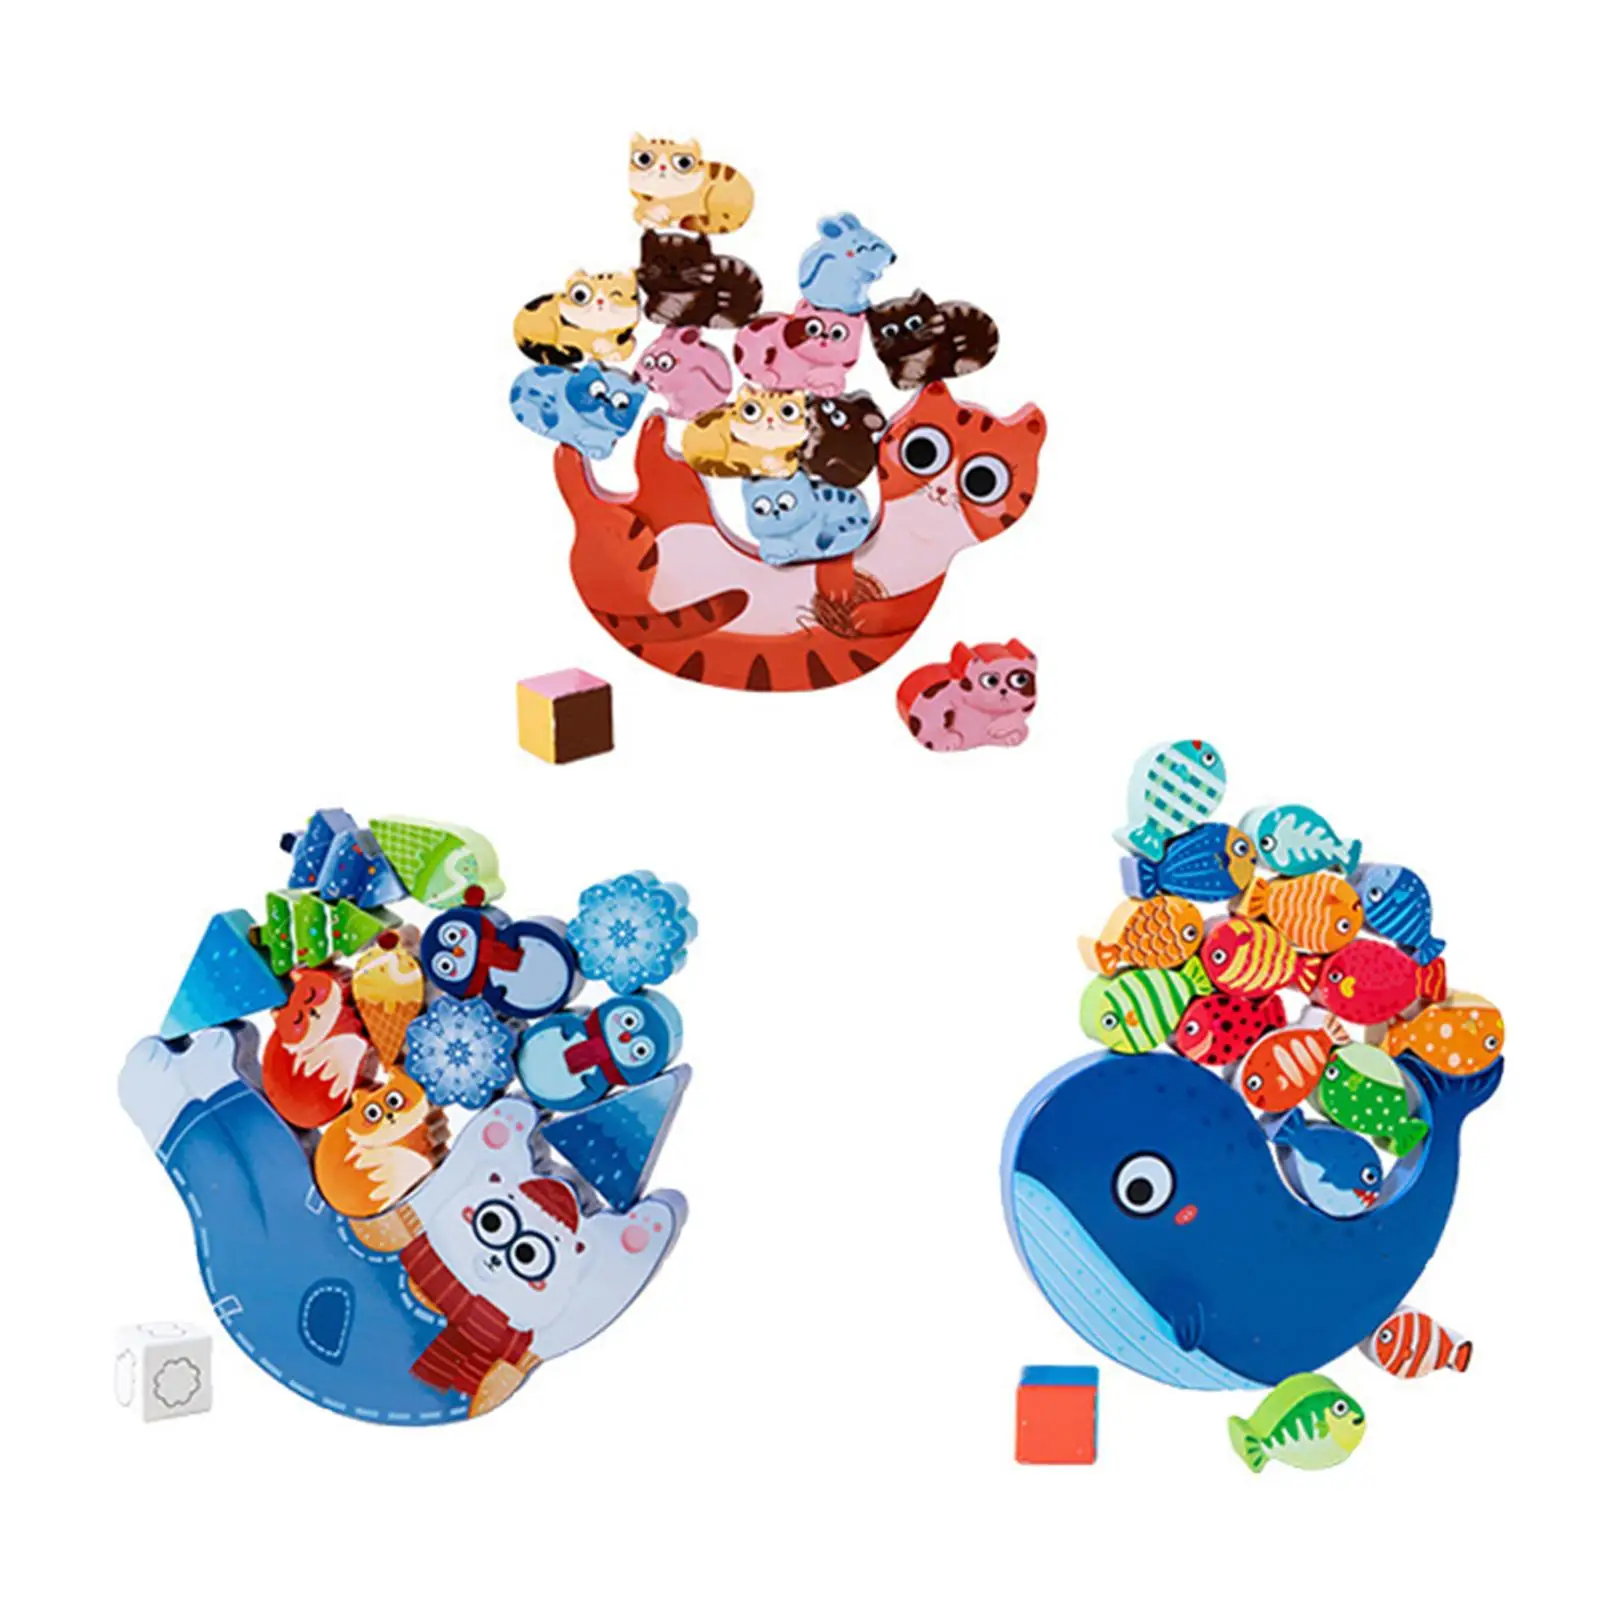 Montessori Educational Stacking Toys for Boys Girls 1 2 3 4 5 Year Old Gifts